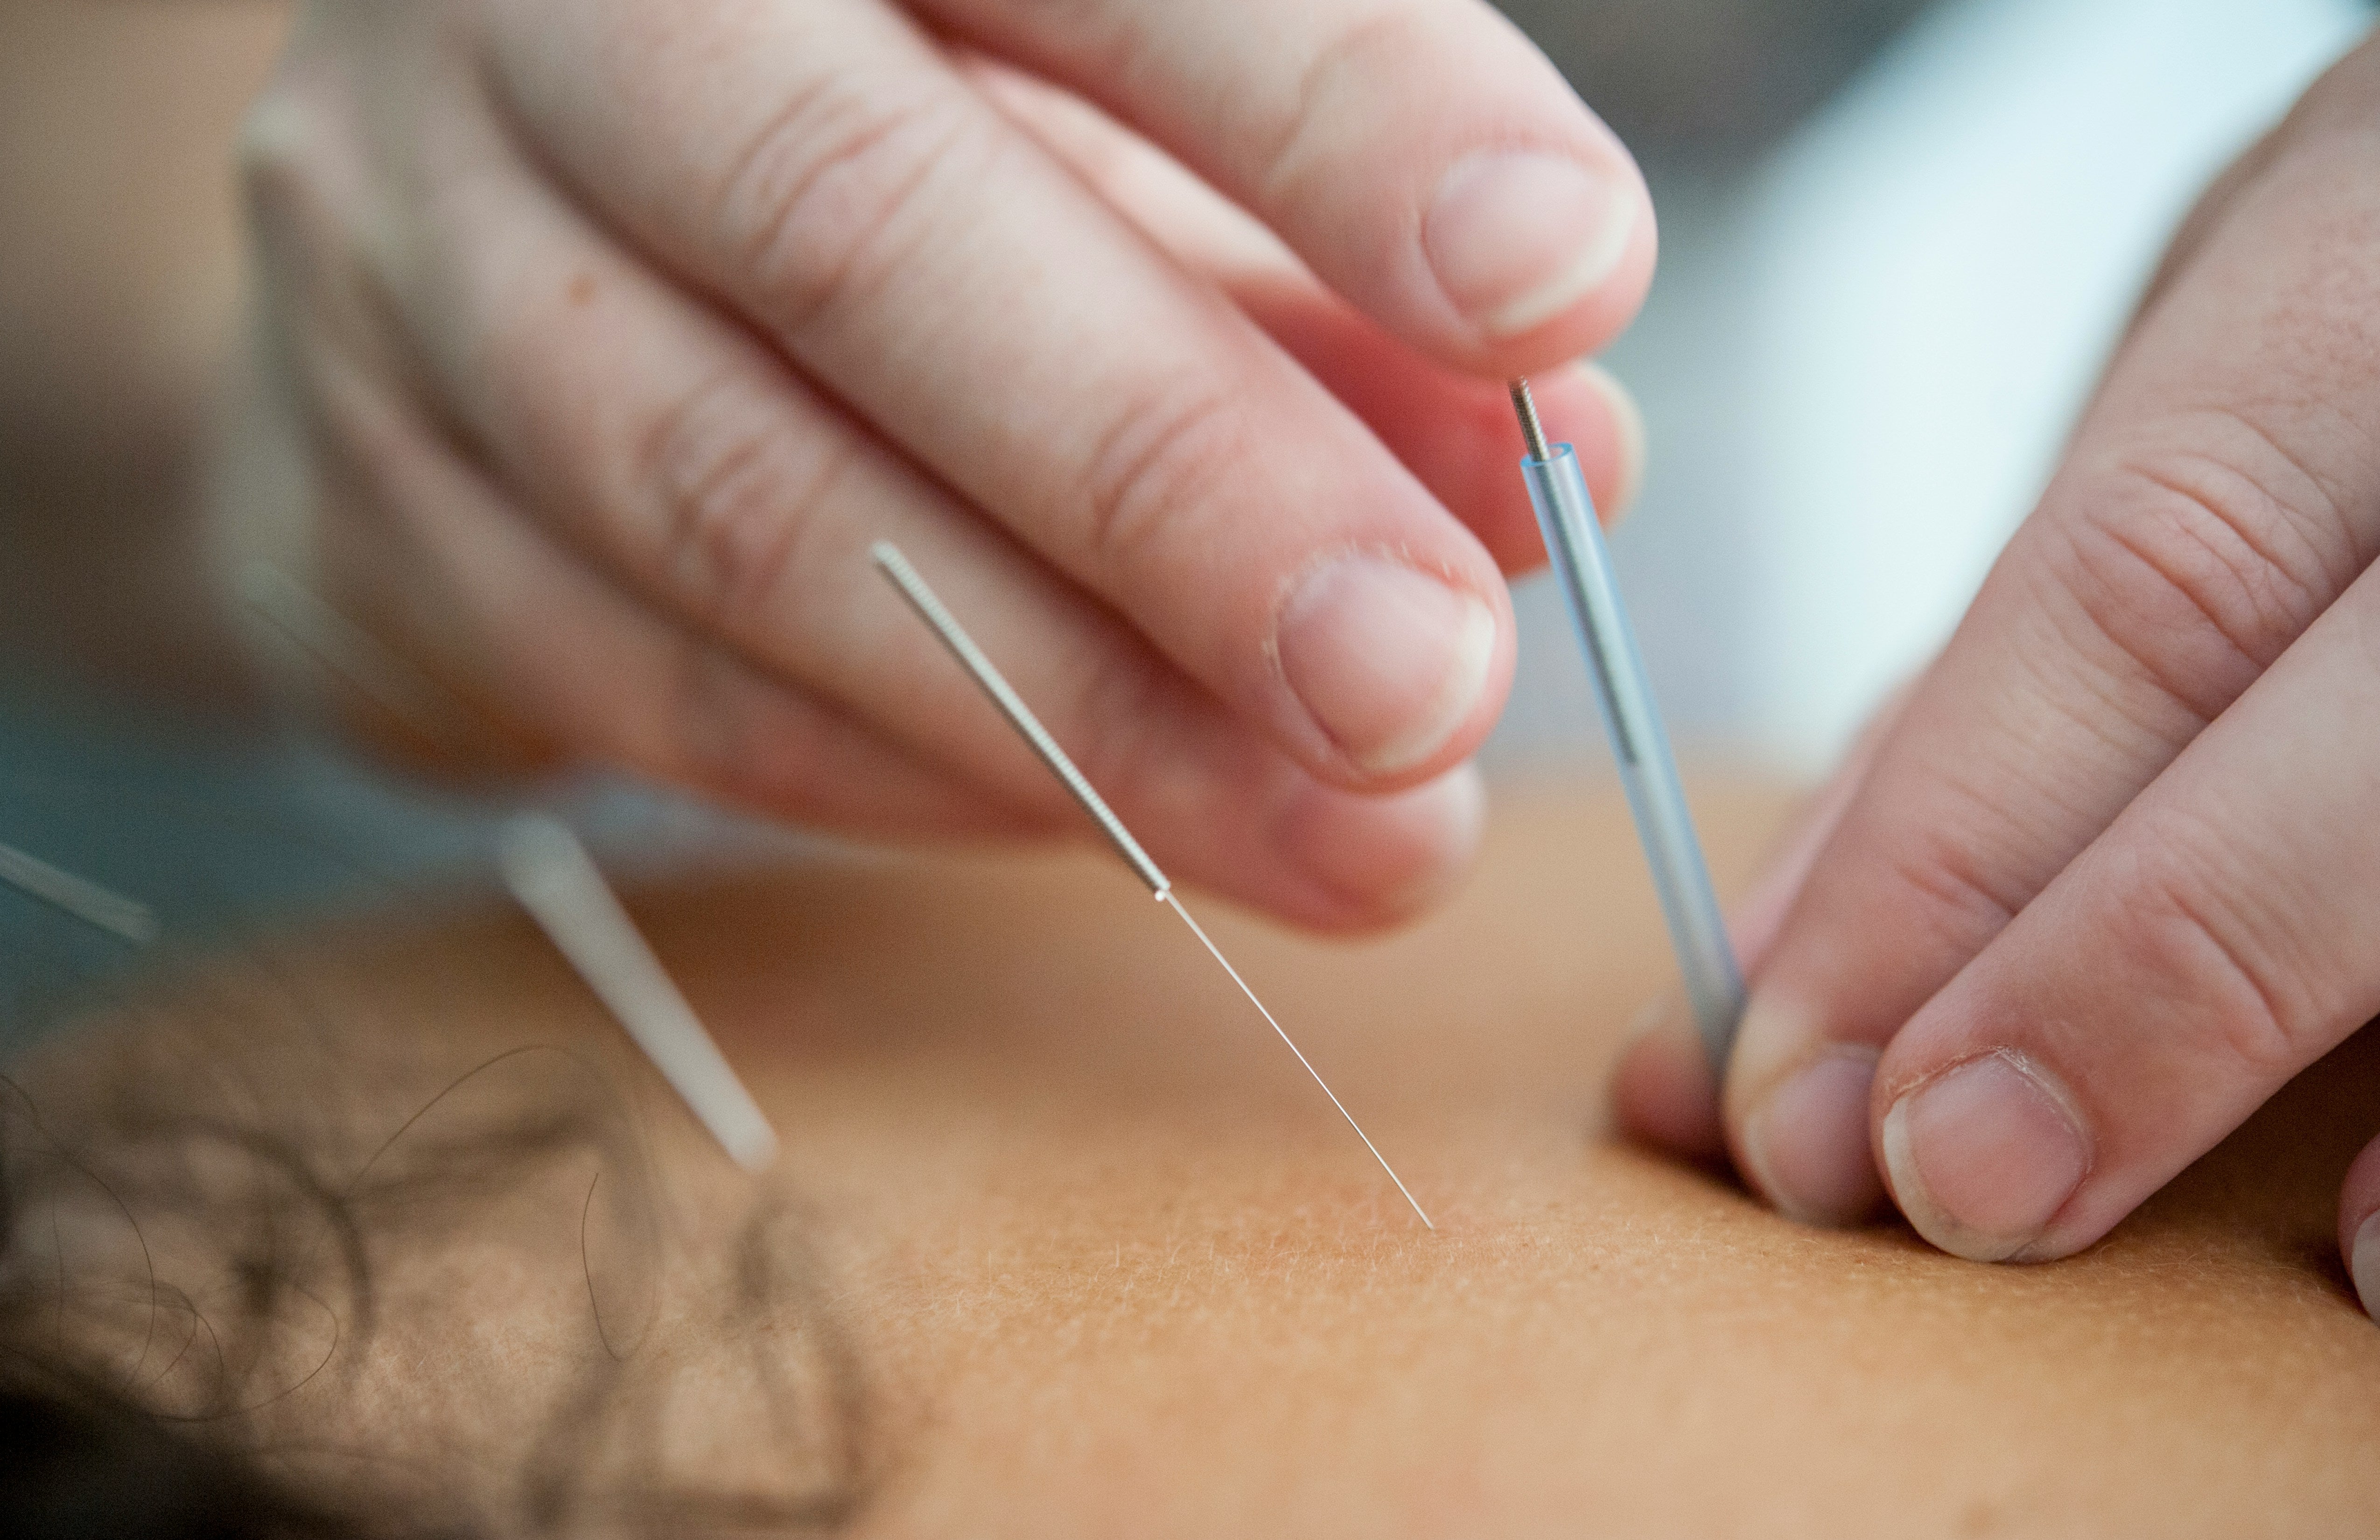 Acupuncture and fertility - can it actually help?